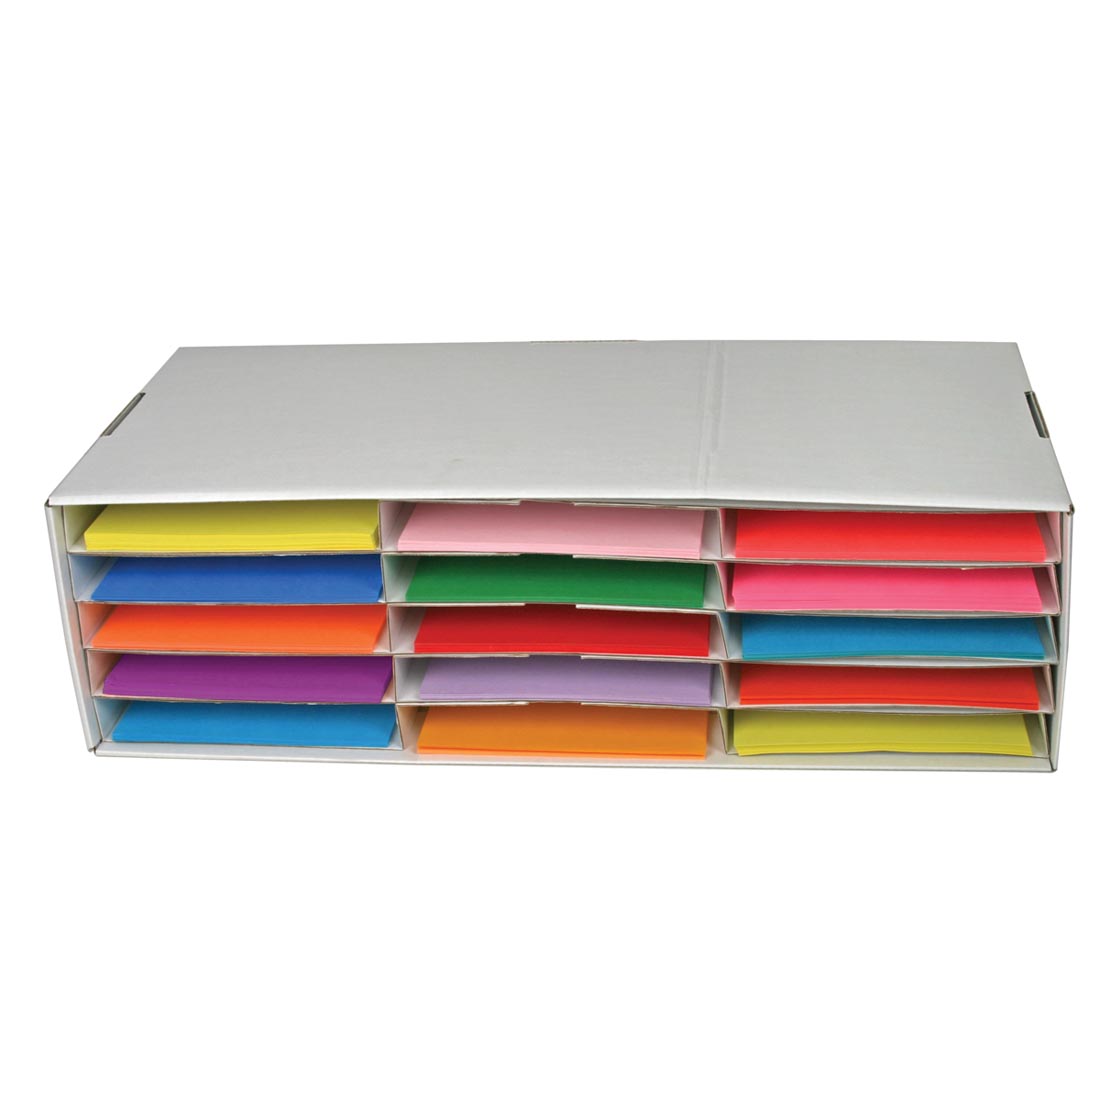 Classroom Keepers 9x12" Construction Paper Storage Box shown holding colorful papers